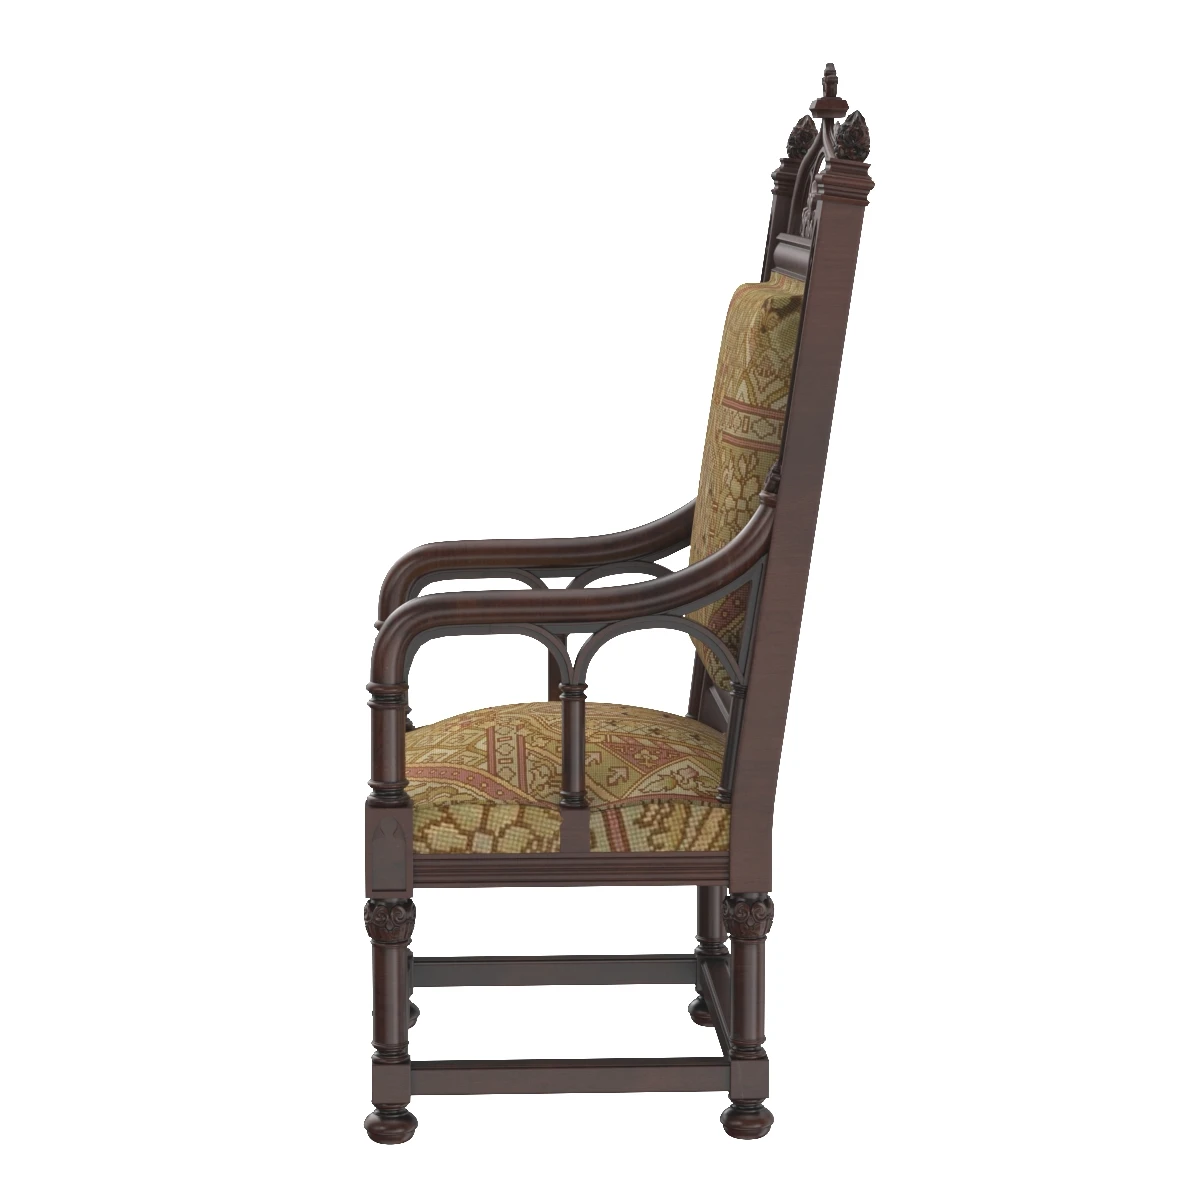 Gothic Style Armchairs France 19th Century 3D Model_04